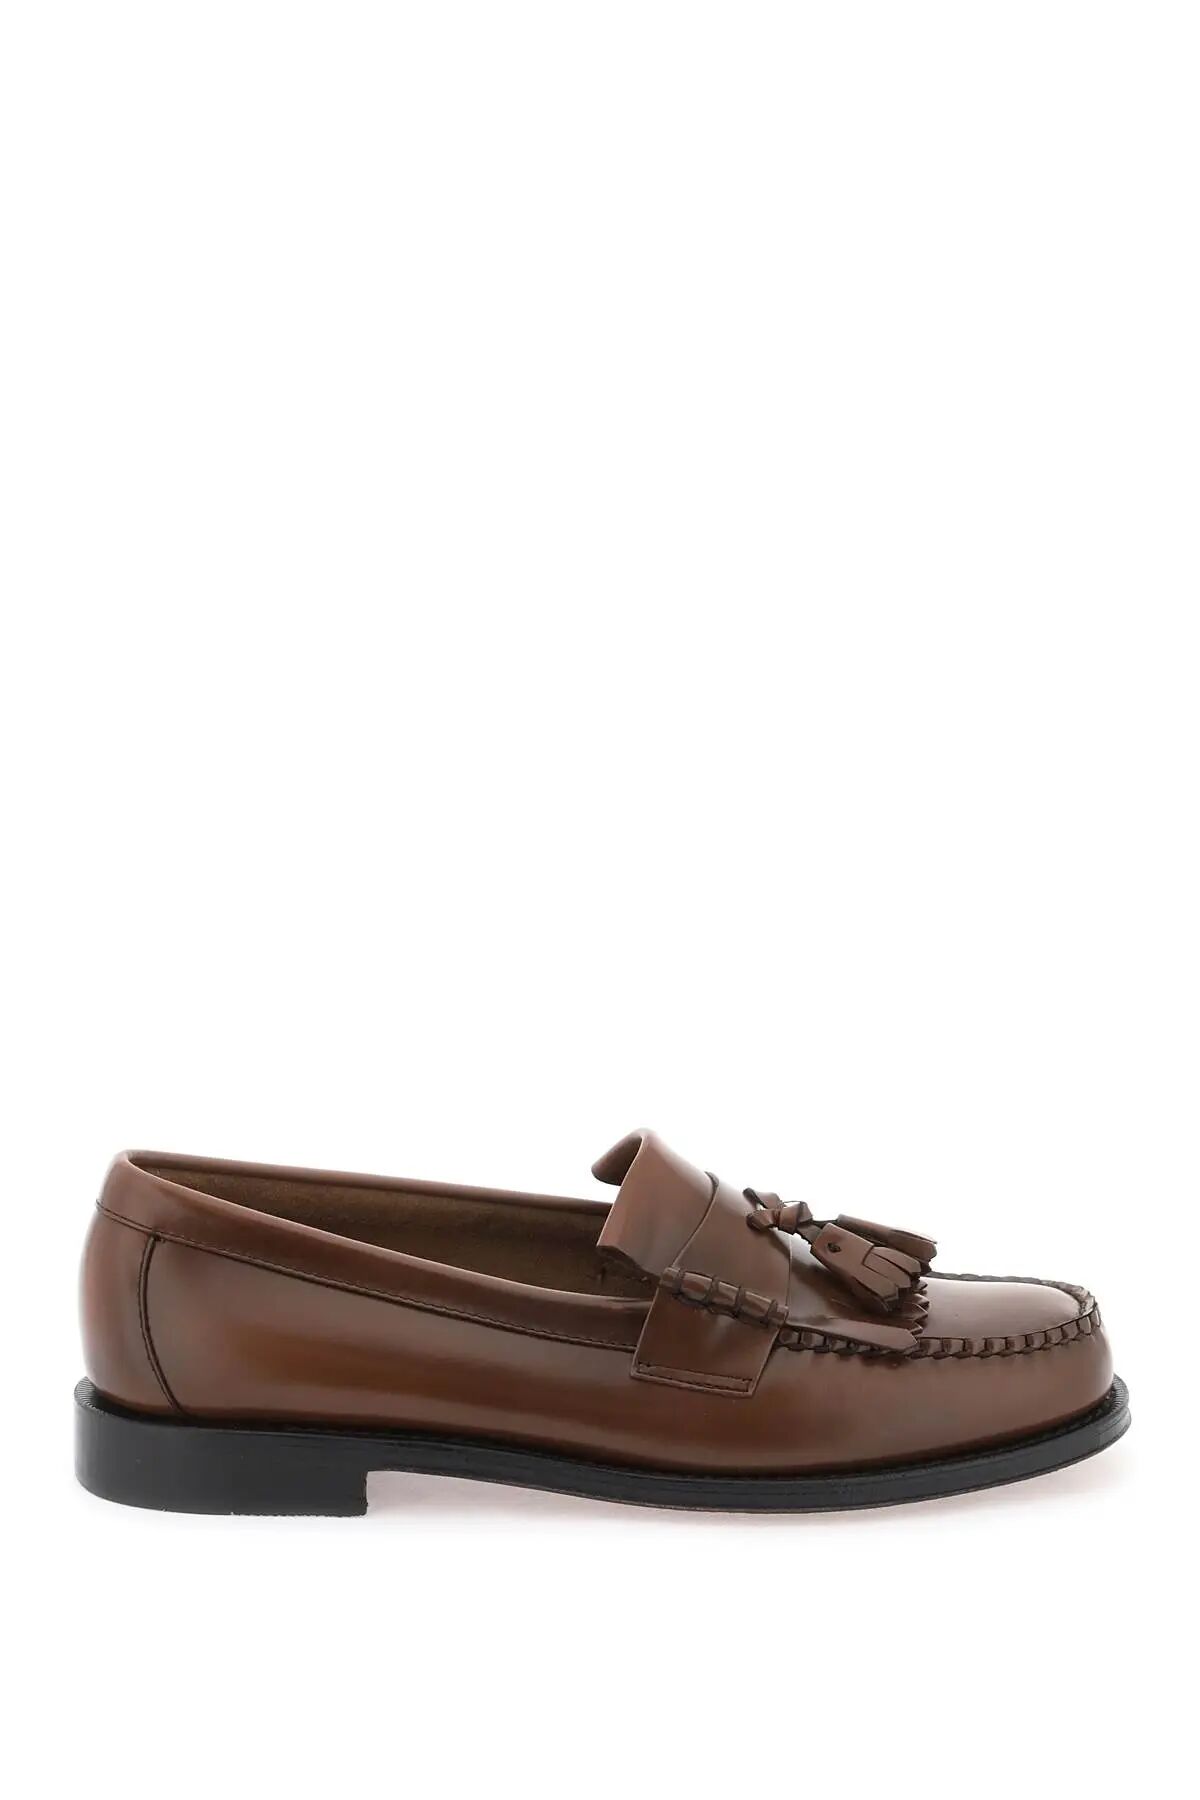 G.H. BASS Esther Kiltie Weejuns loafers  - Brown - male - Size: 41,5